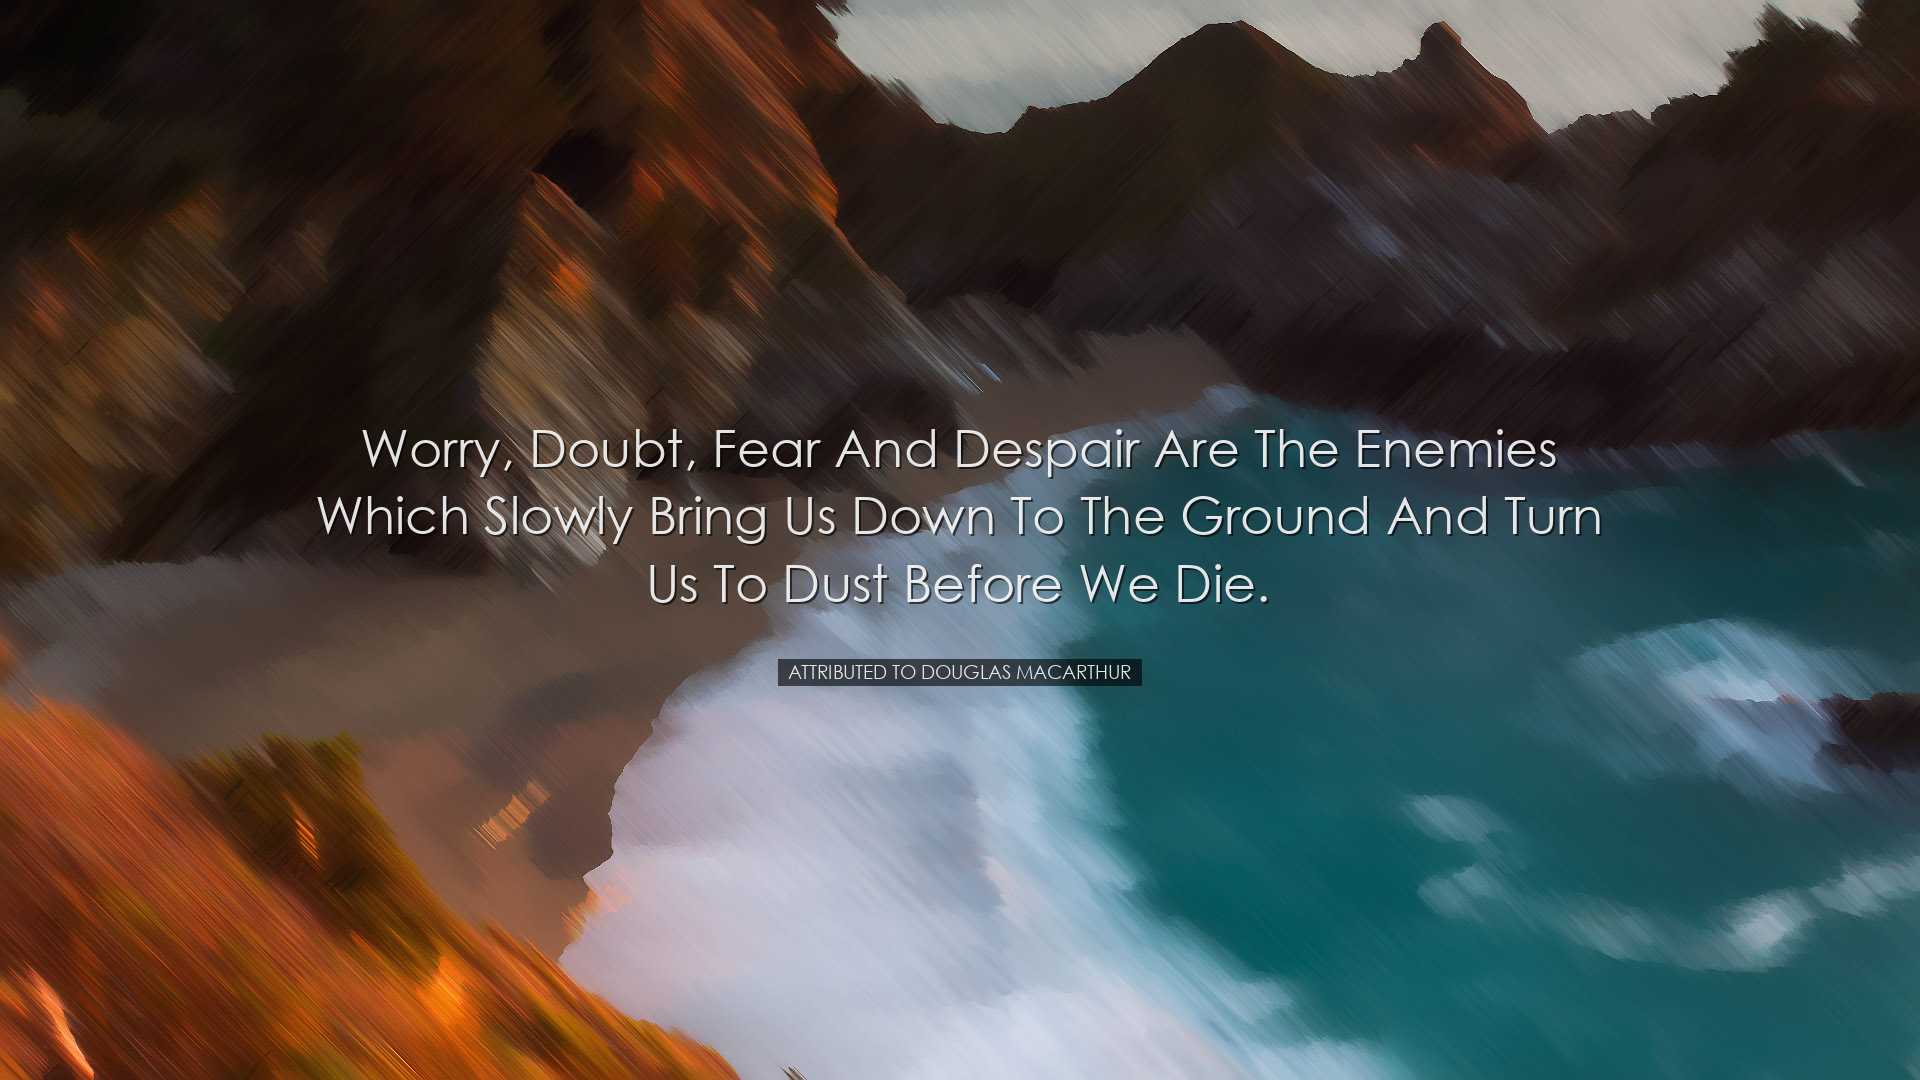 Worry, doubt, fear and despair are the enemies which slowly bring